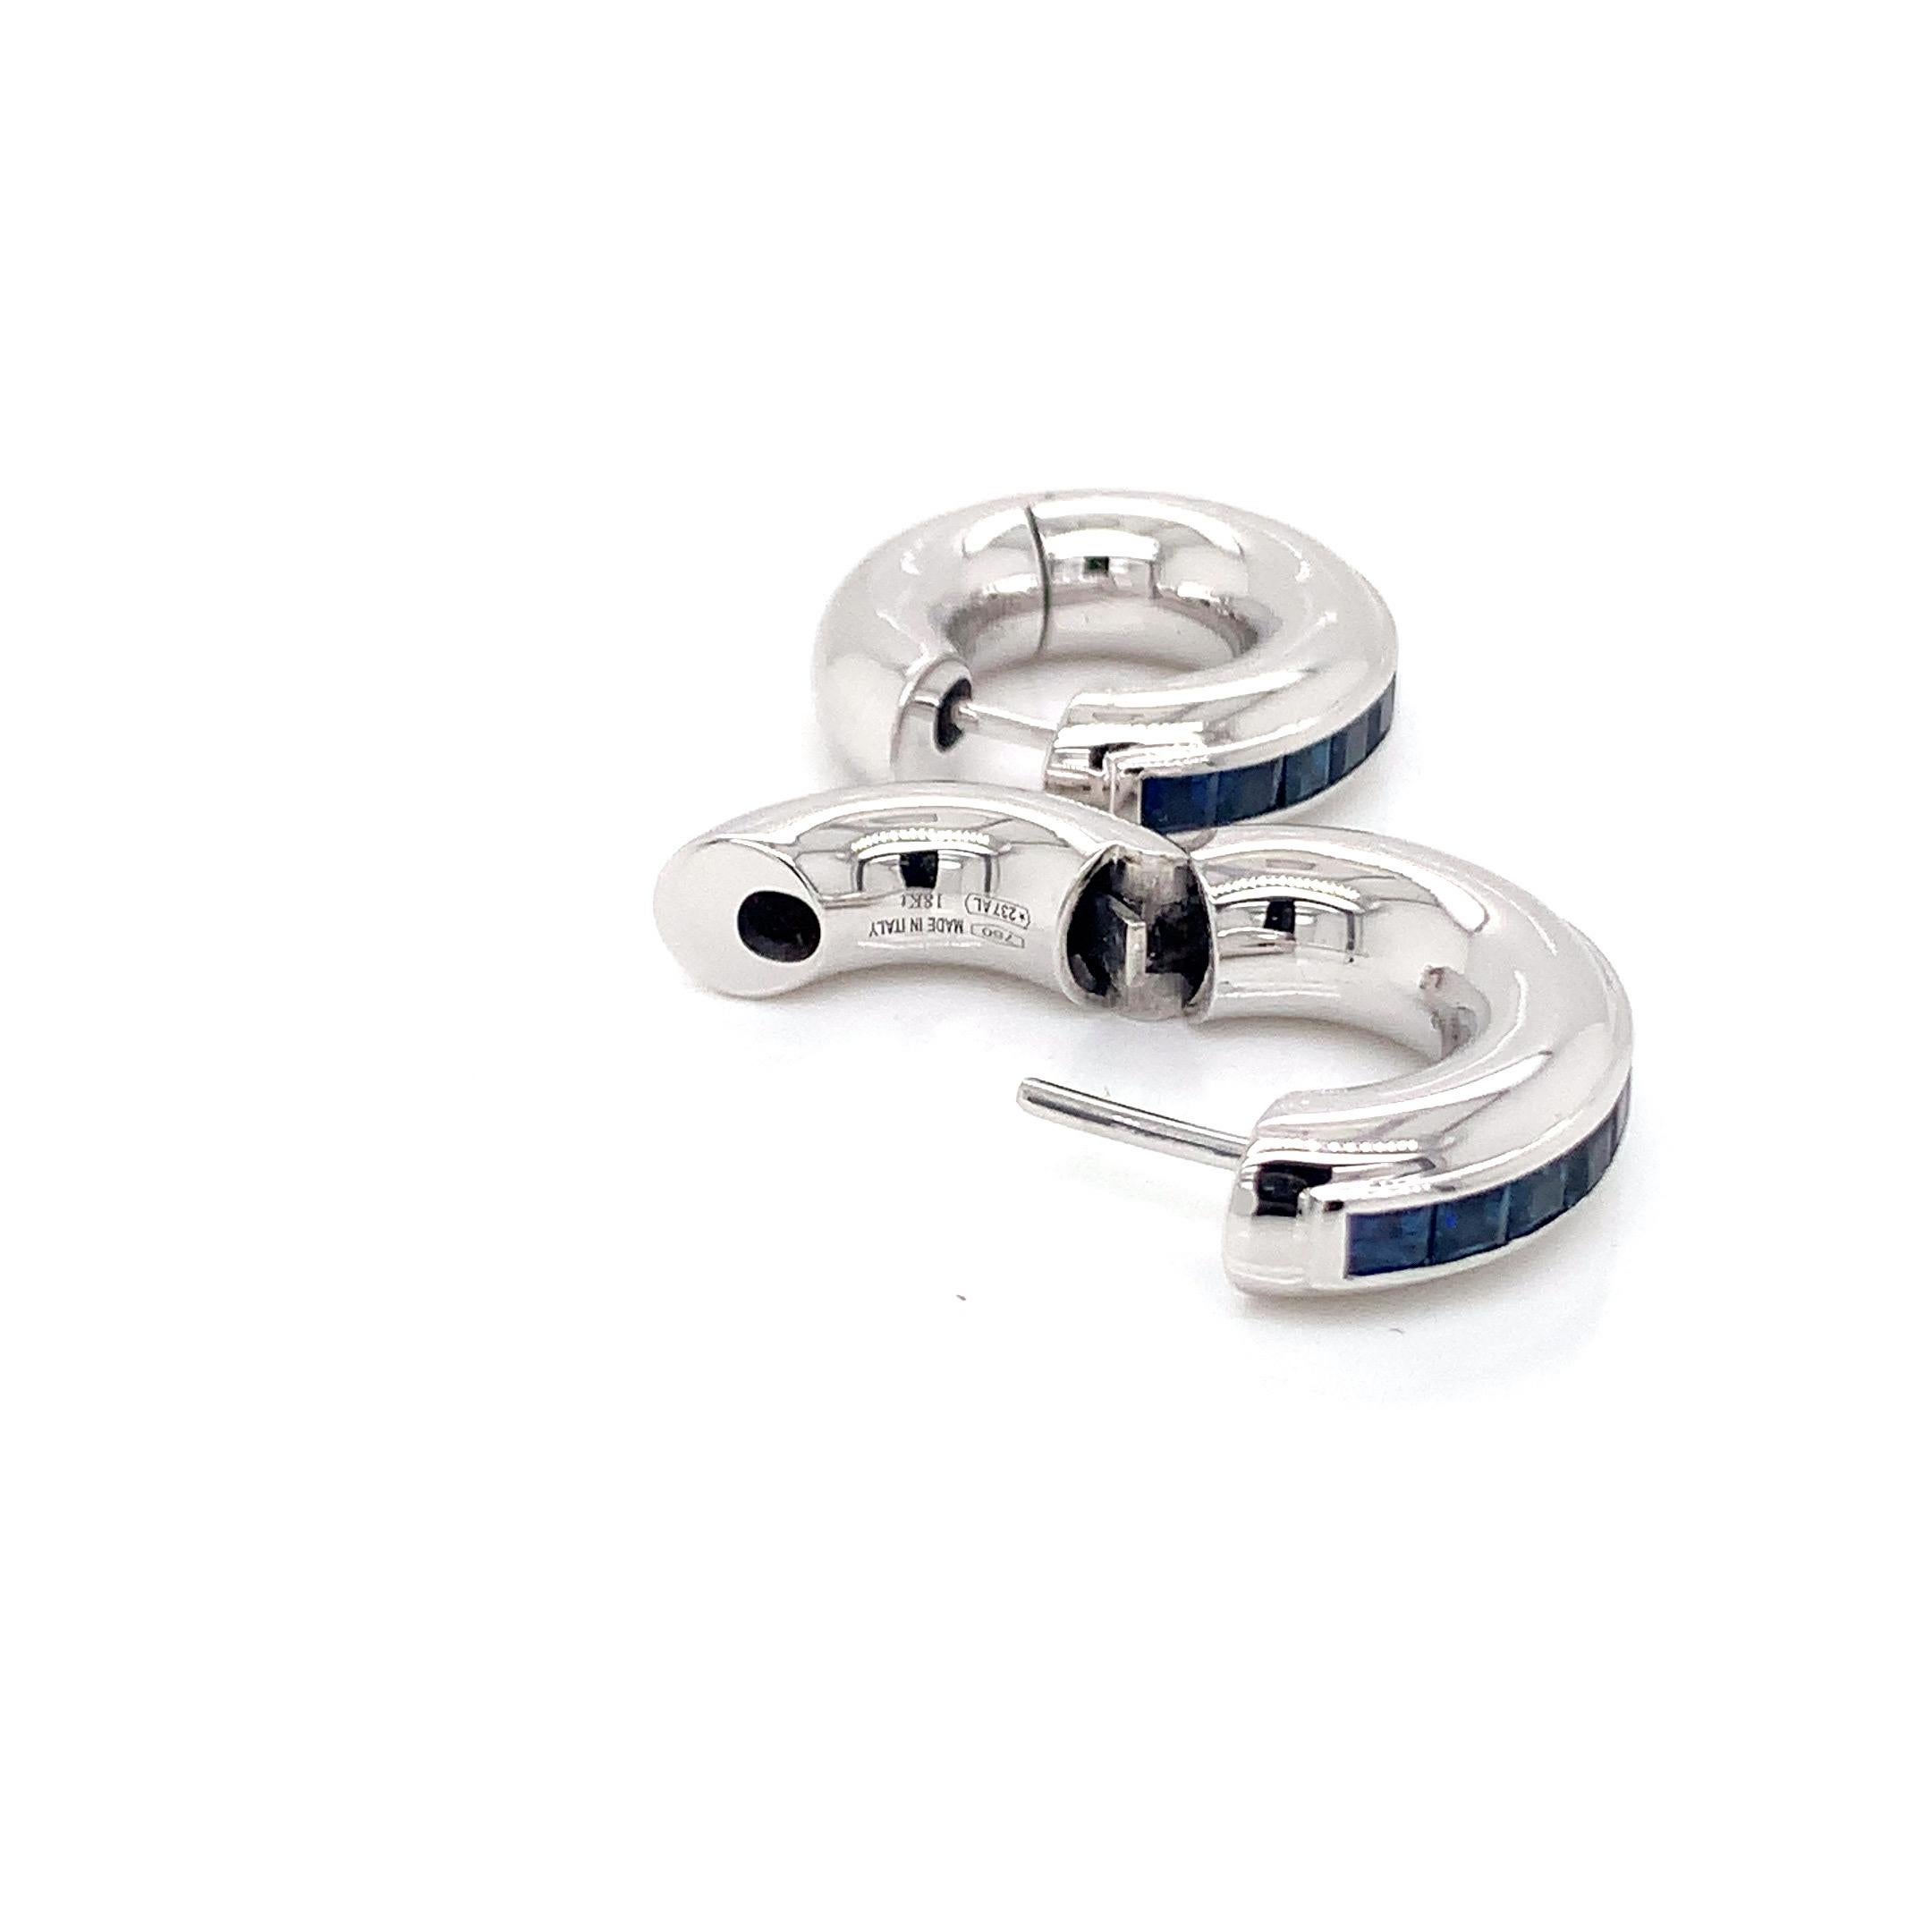 Take the plunge with these Huggie Earrings from Garavelli! Crafted with 18kt white gold and blue sapphires motif, these sleek  earrings are perfect for the thrill-seeker who loves a stylish challenge.
Step up your game with our blue line huggie